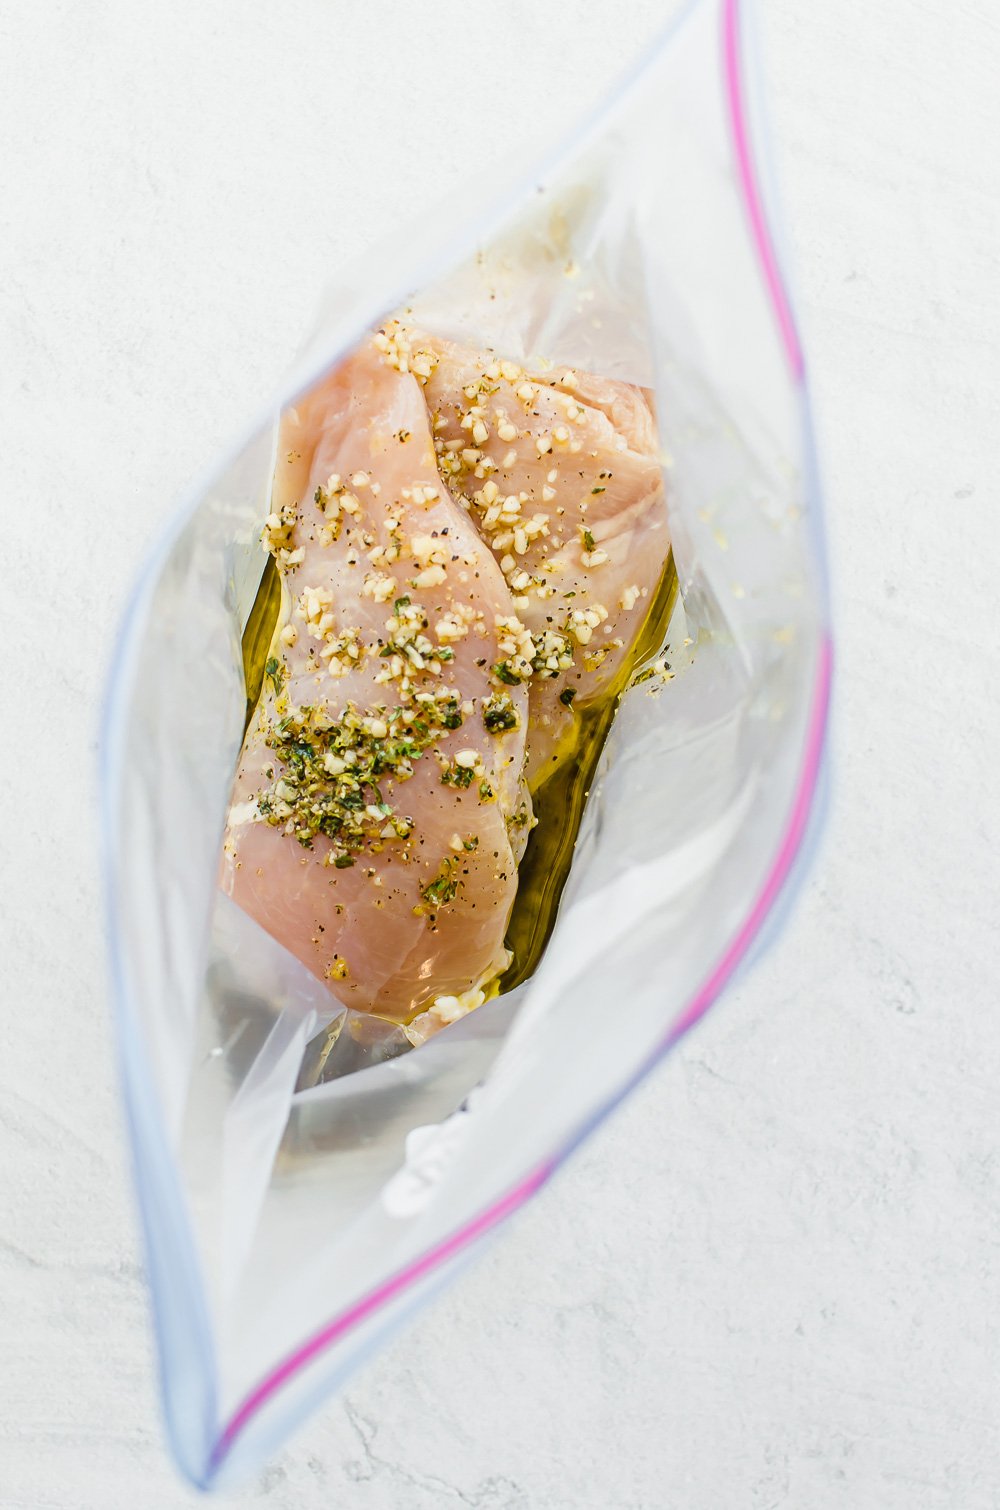 Looking into a freezer bag with chicken breasts in lemon garlic marinade.